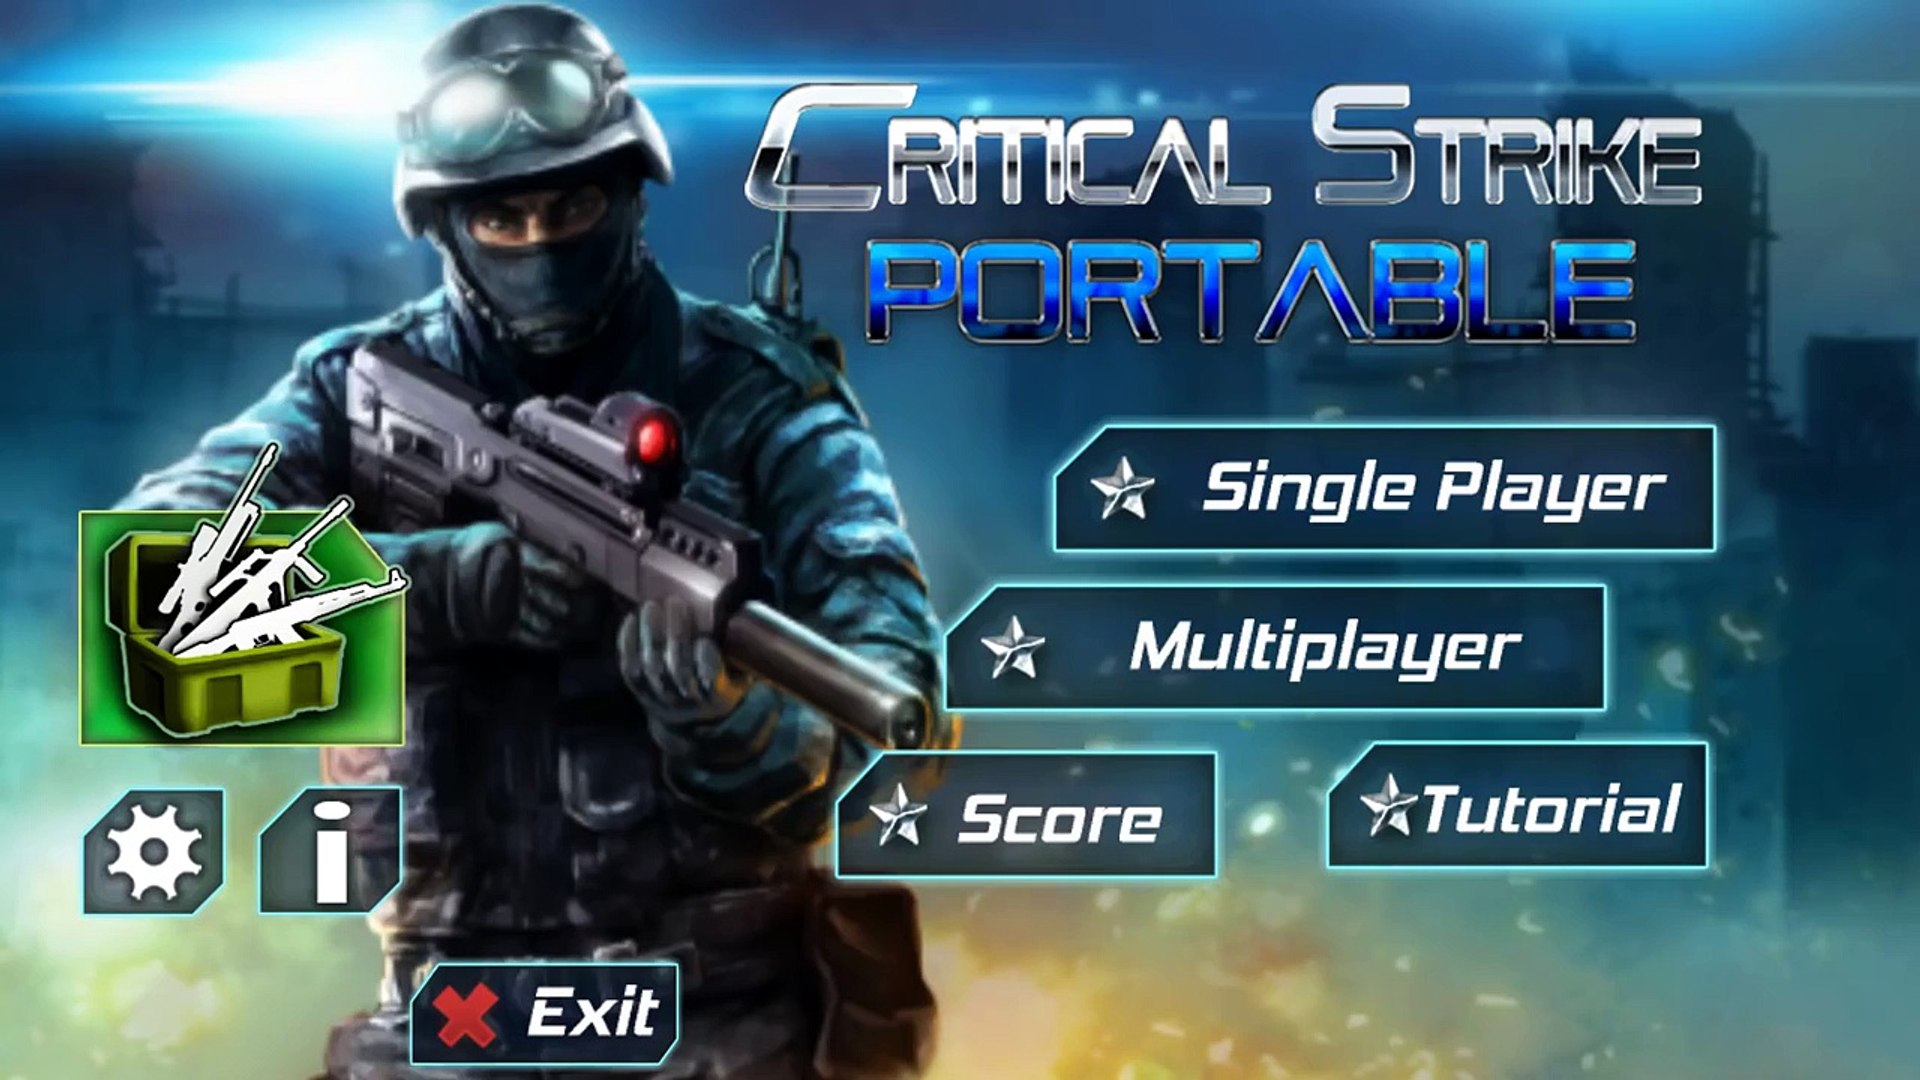 CRITICAL STRIKE PORTABLE free online game on